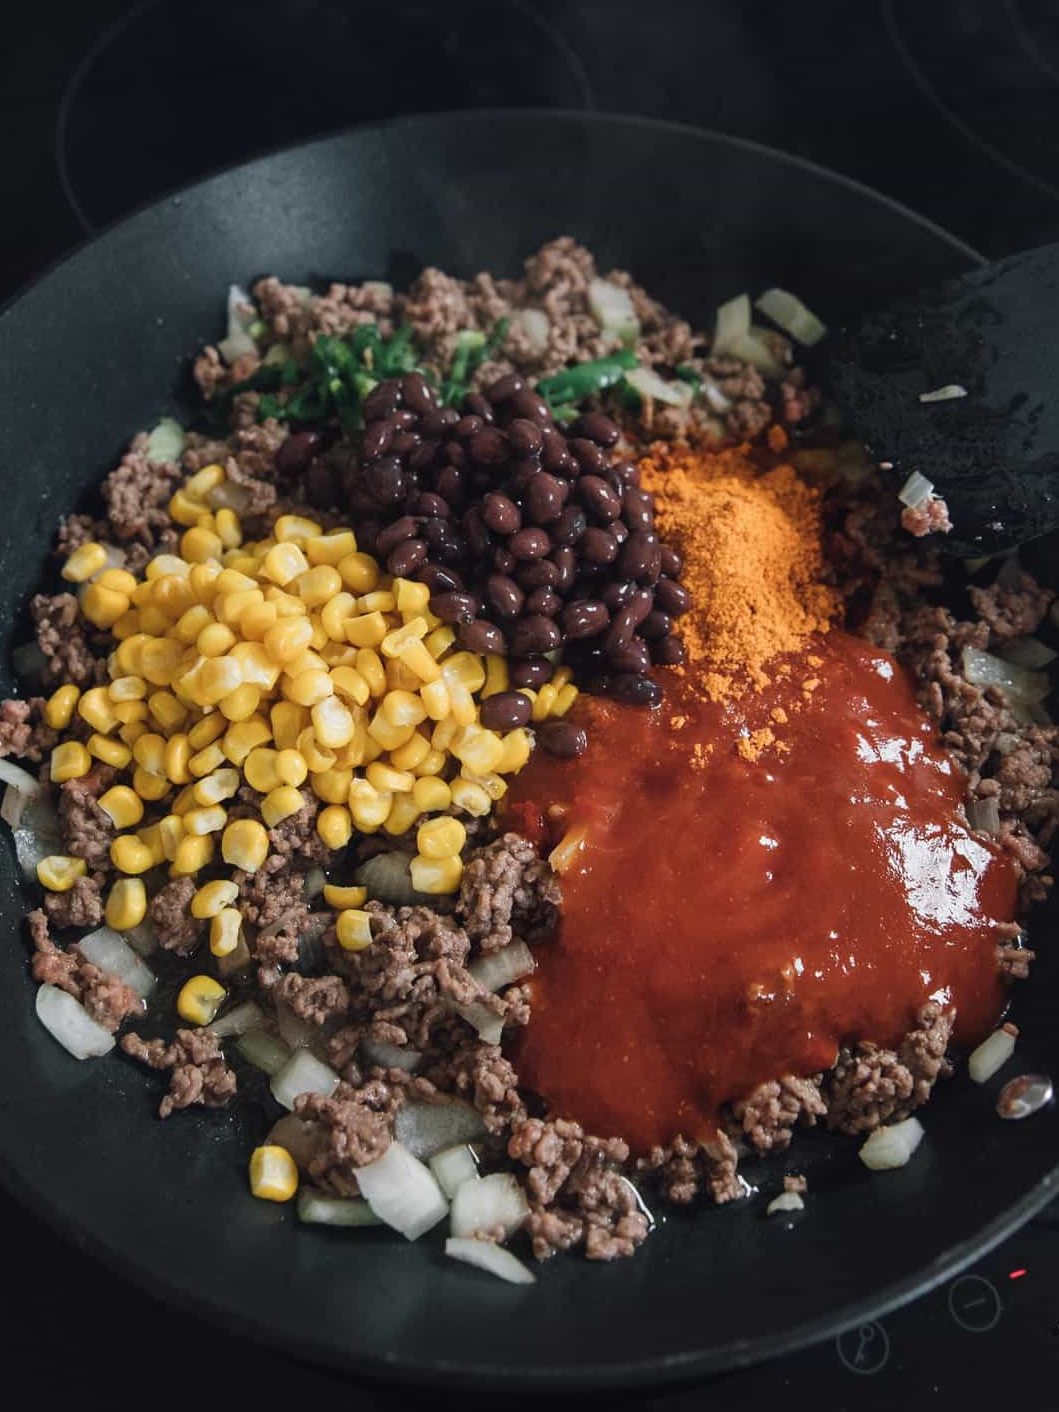 Add the taco seasoning, green chilli, black beans, frozen corn and enchilada sauce to the skillet with the meat.